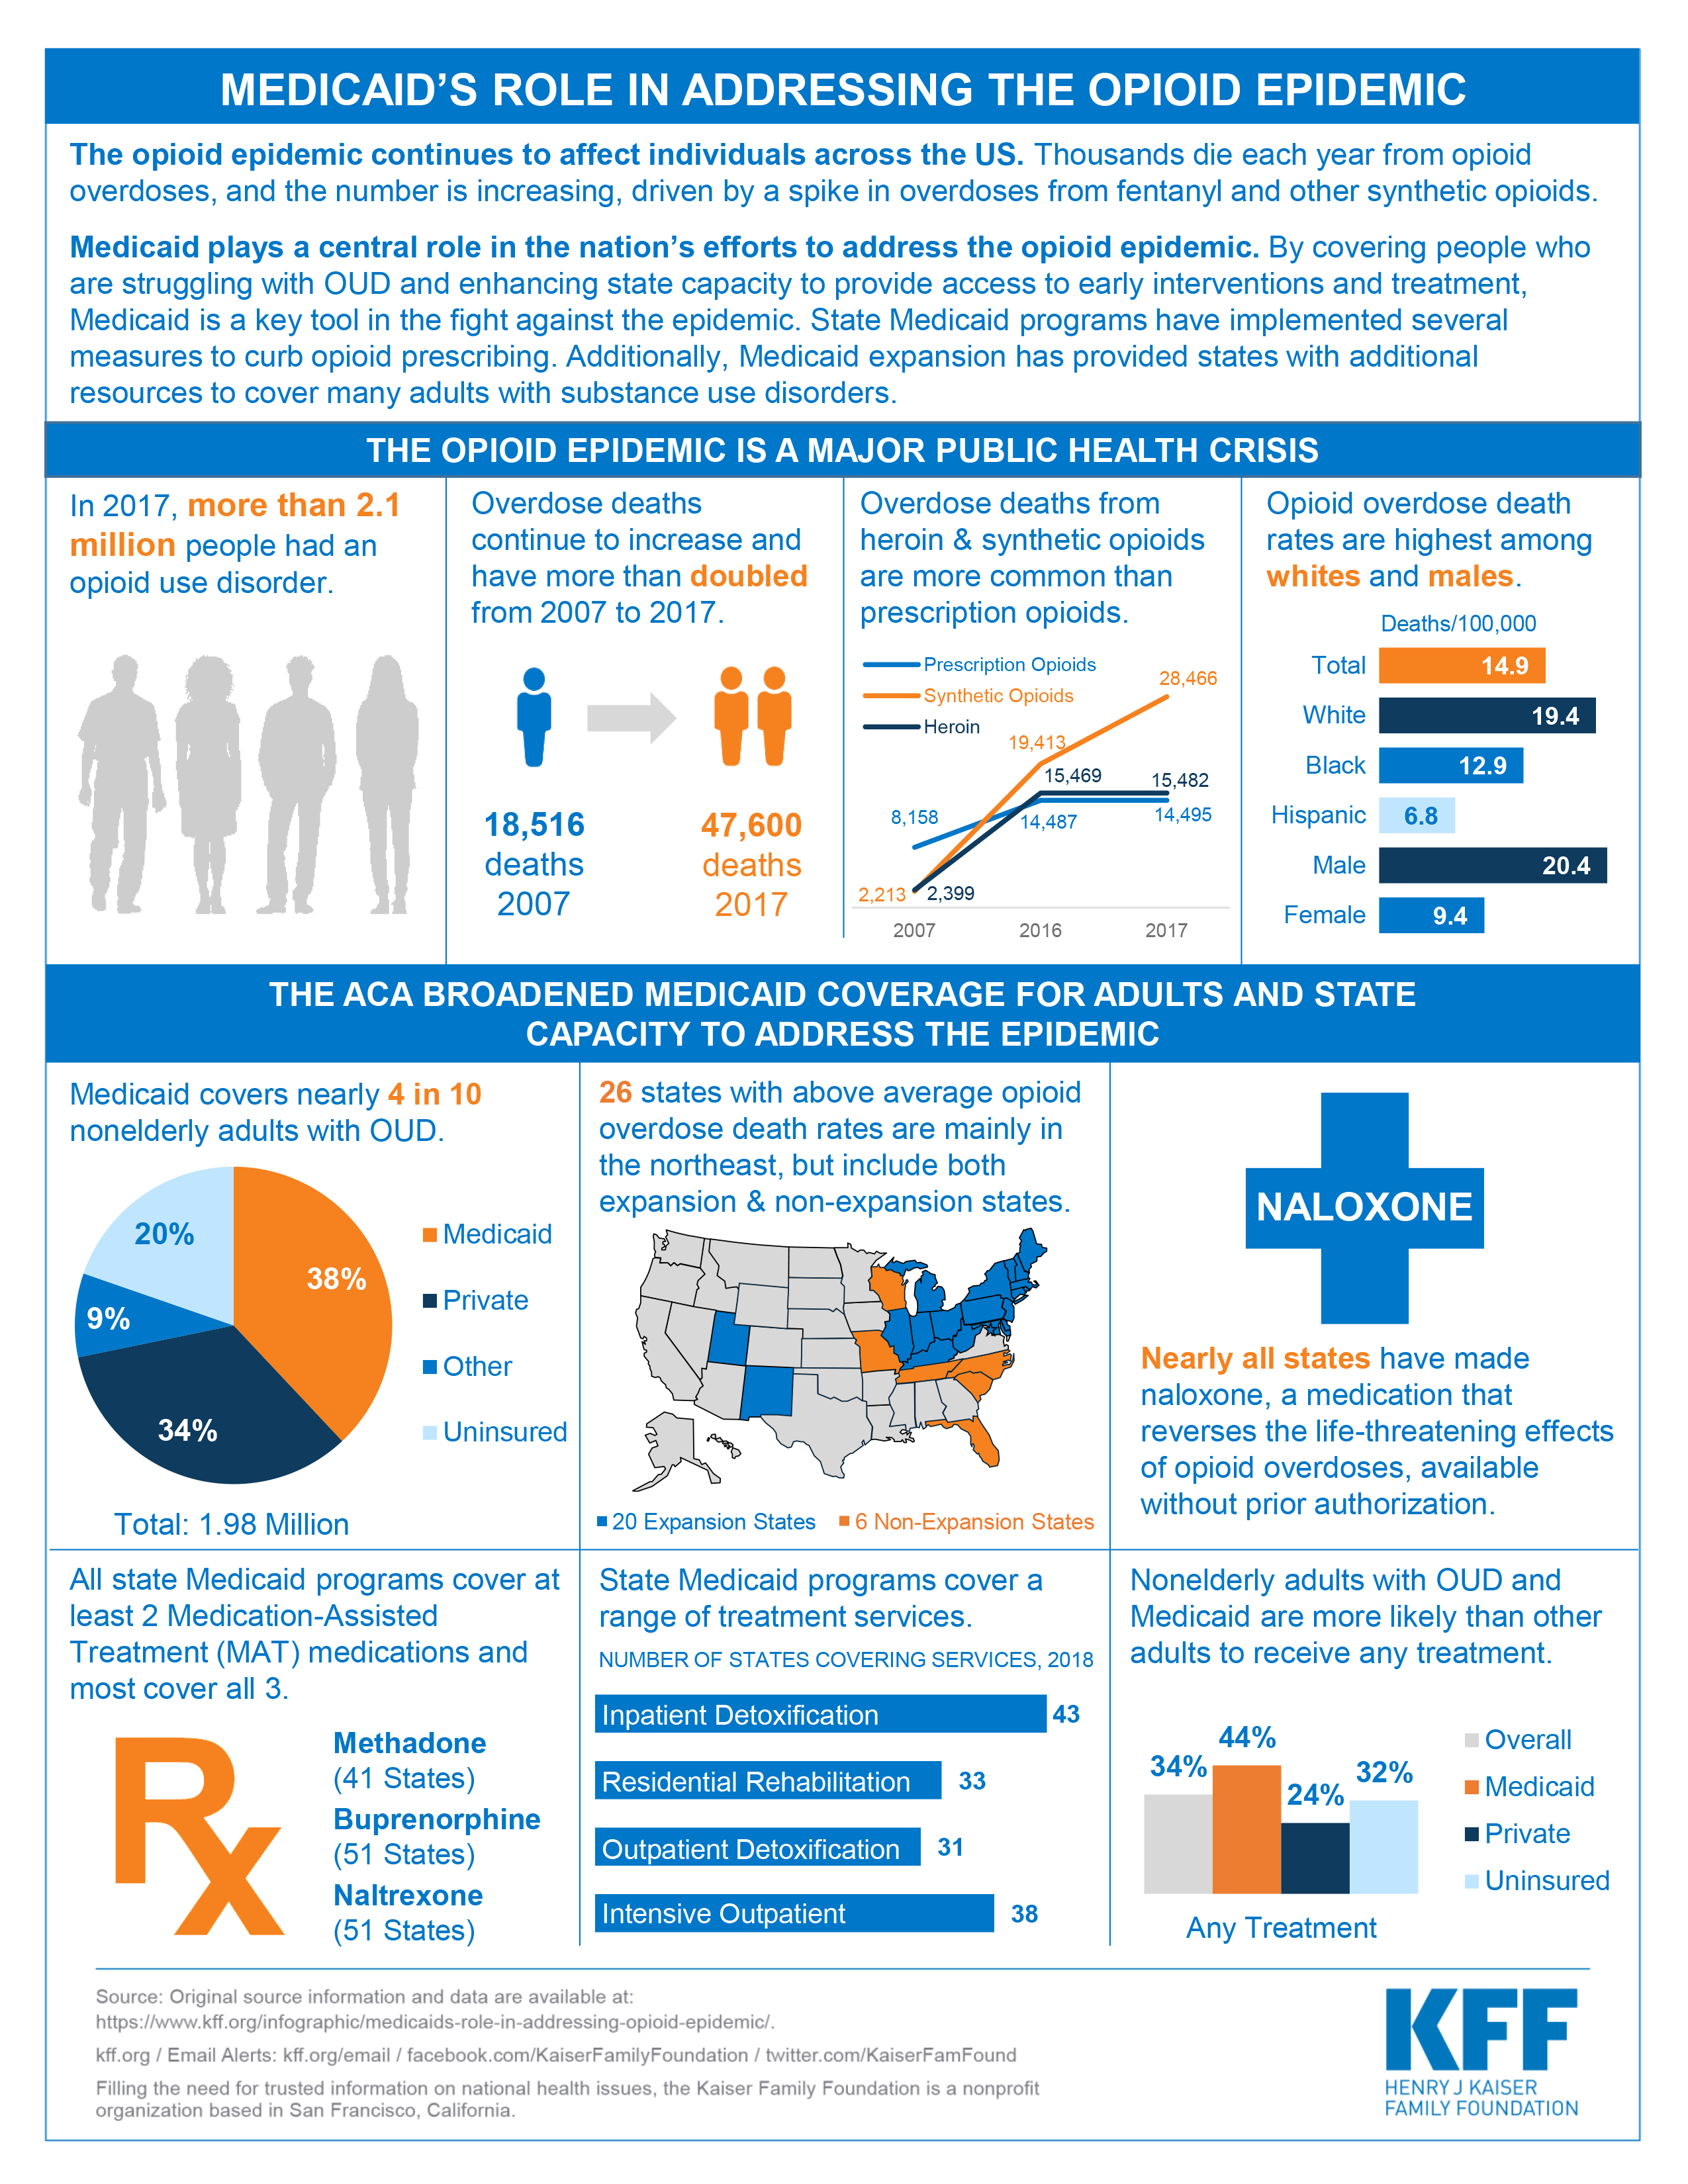 Medicaid's Role in Addressing the Opioid Epidemic KFF